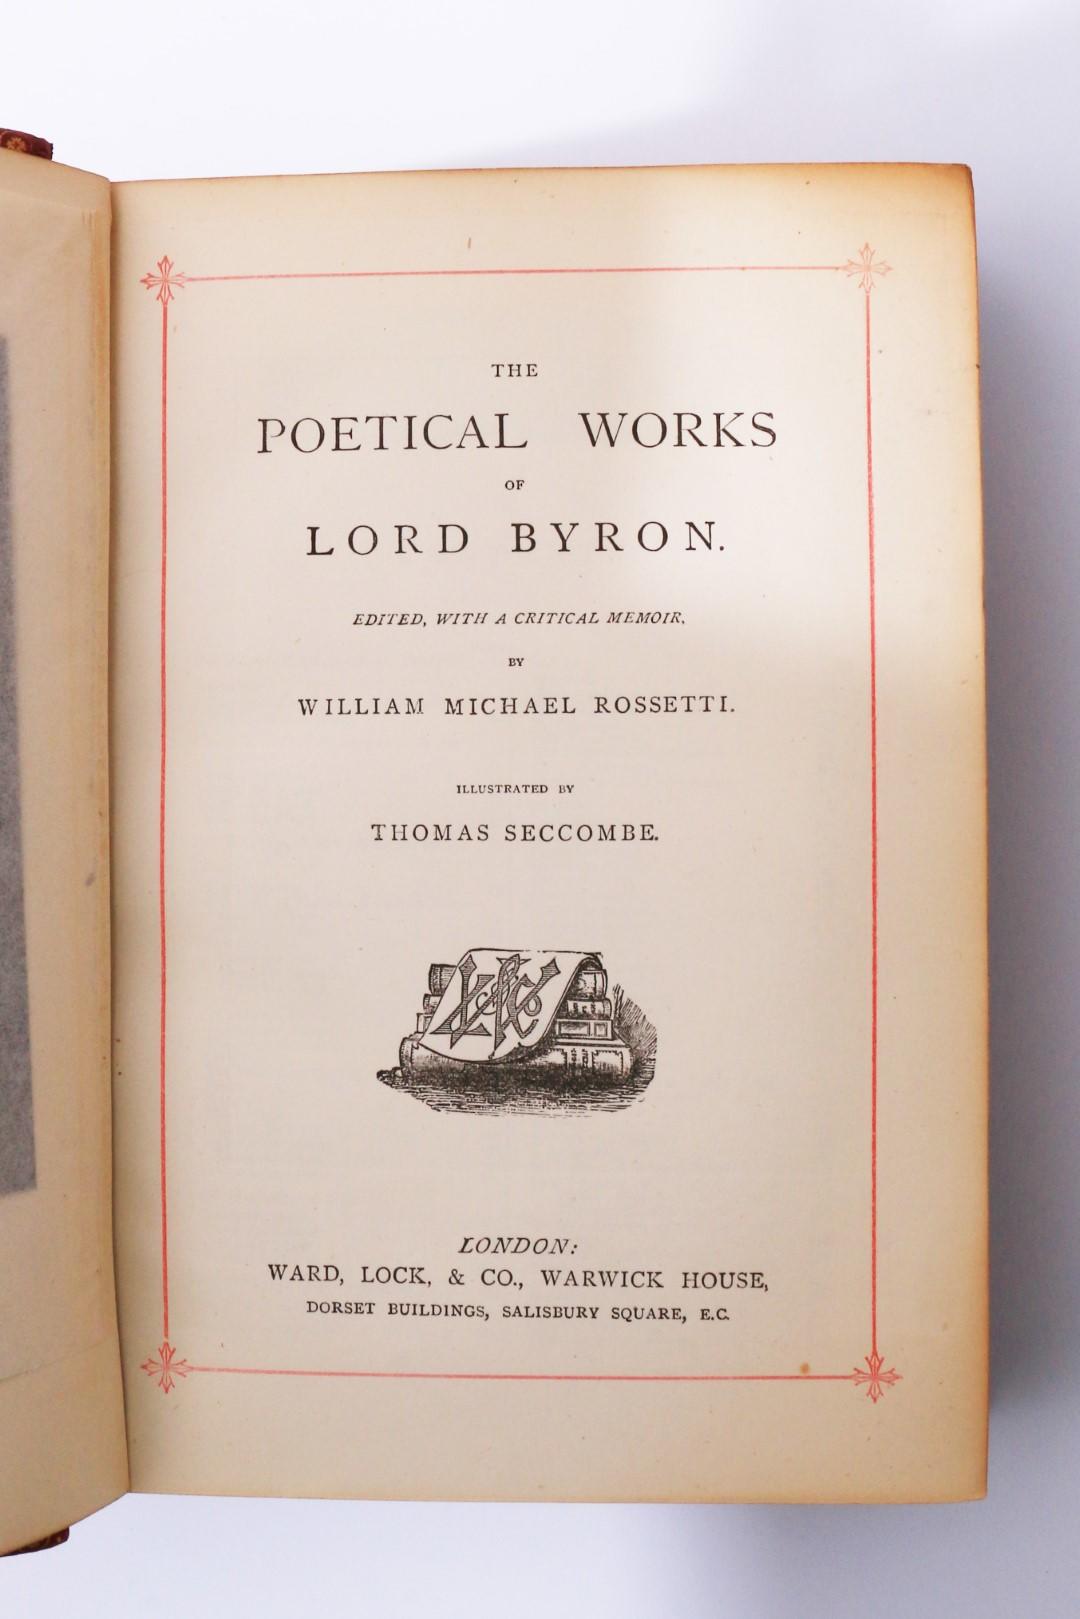 Lord Byron - The Poetical Works - Ward, Lock & Co., n.d. [c1890s], Later Edition.